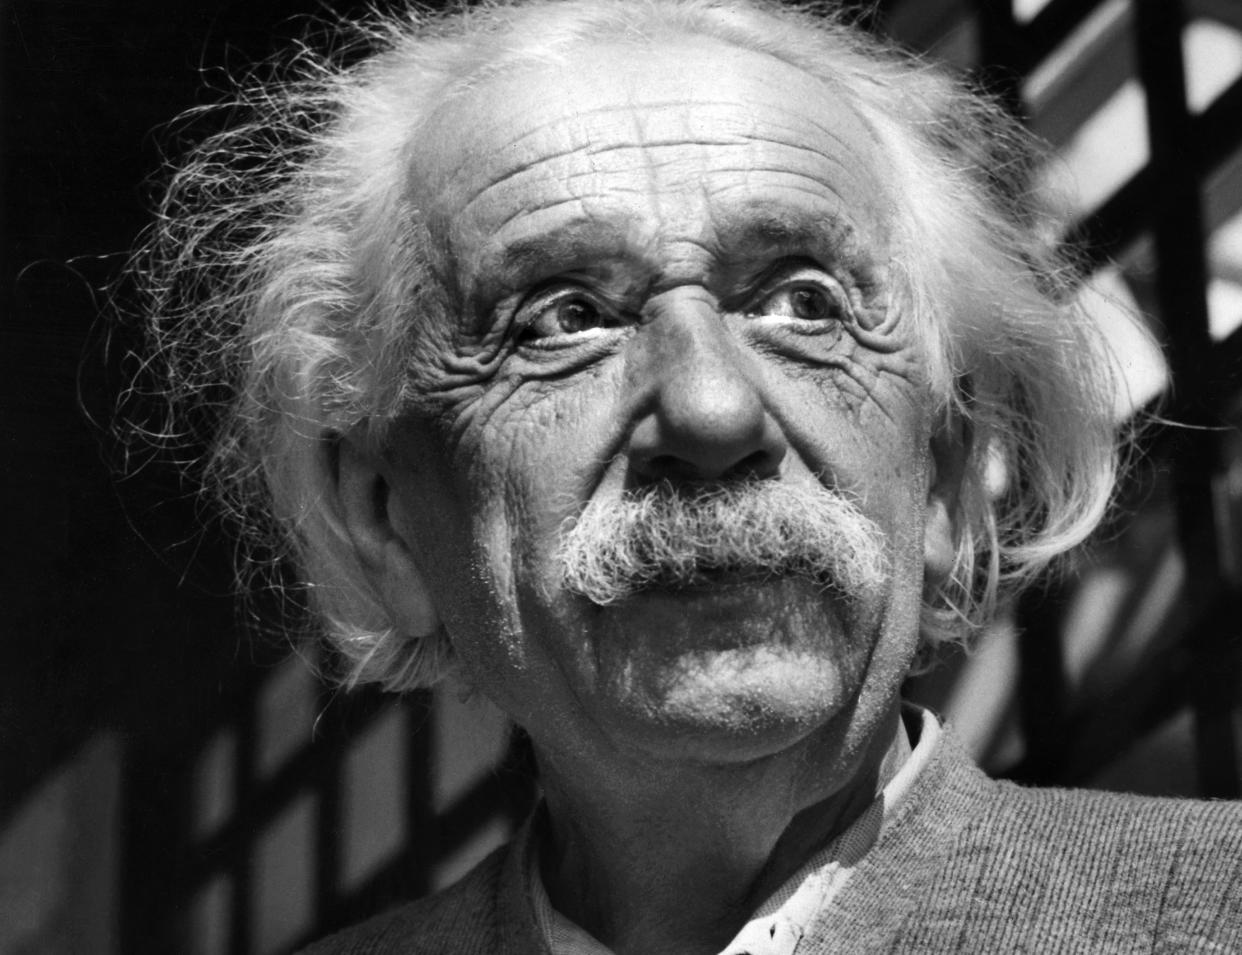 FILE - This June, 1954, file photo shows renowned physicist Albert Einstein in Princeton, N.J. More than a decade before the Nazis seized power in Germany, Albert Einstein was on the run and already fearful for his country’s future, according to a newly revealed handwritten letter. (AP Photo, File)